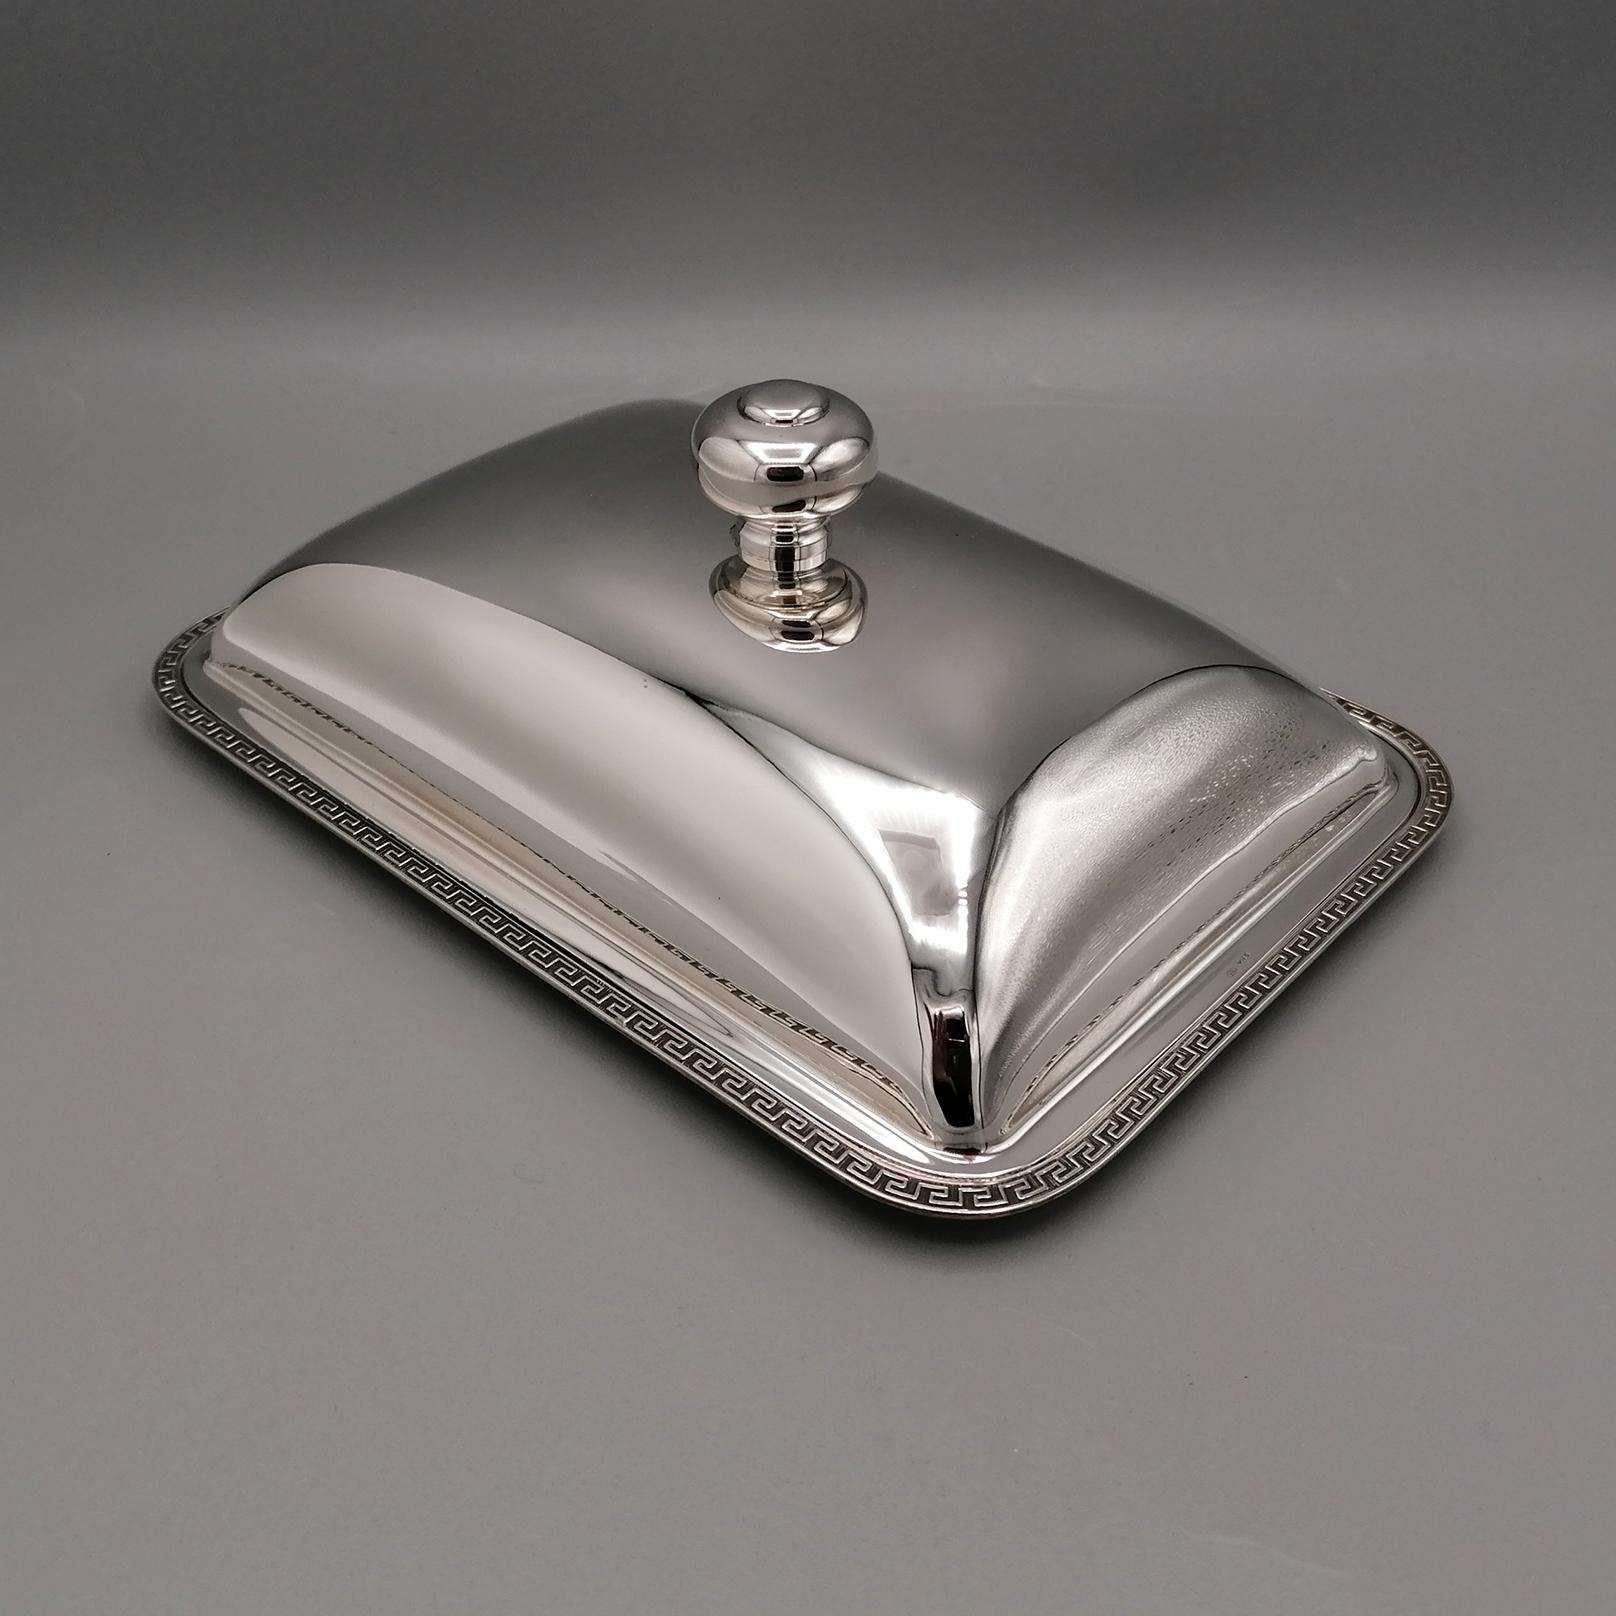 Sterling silver butter dish.
It is rectangular in shape with rounded corners, a neoclassical style border has been welded onto the edge of the tray.
A liner has been placed in the tray where the butter will be placed.
A smooth convex lid completes